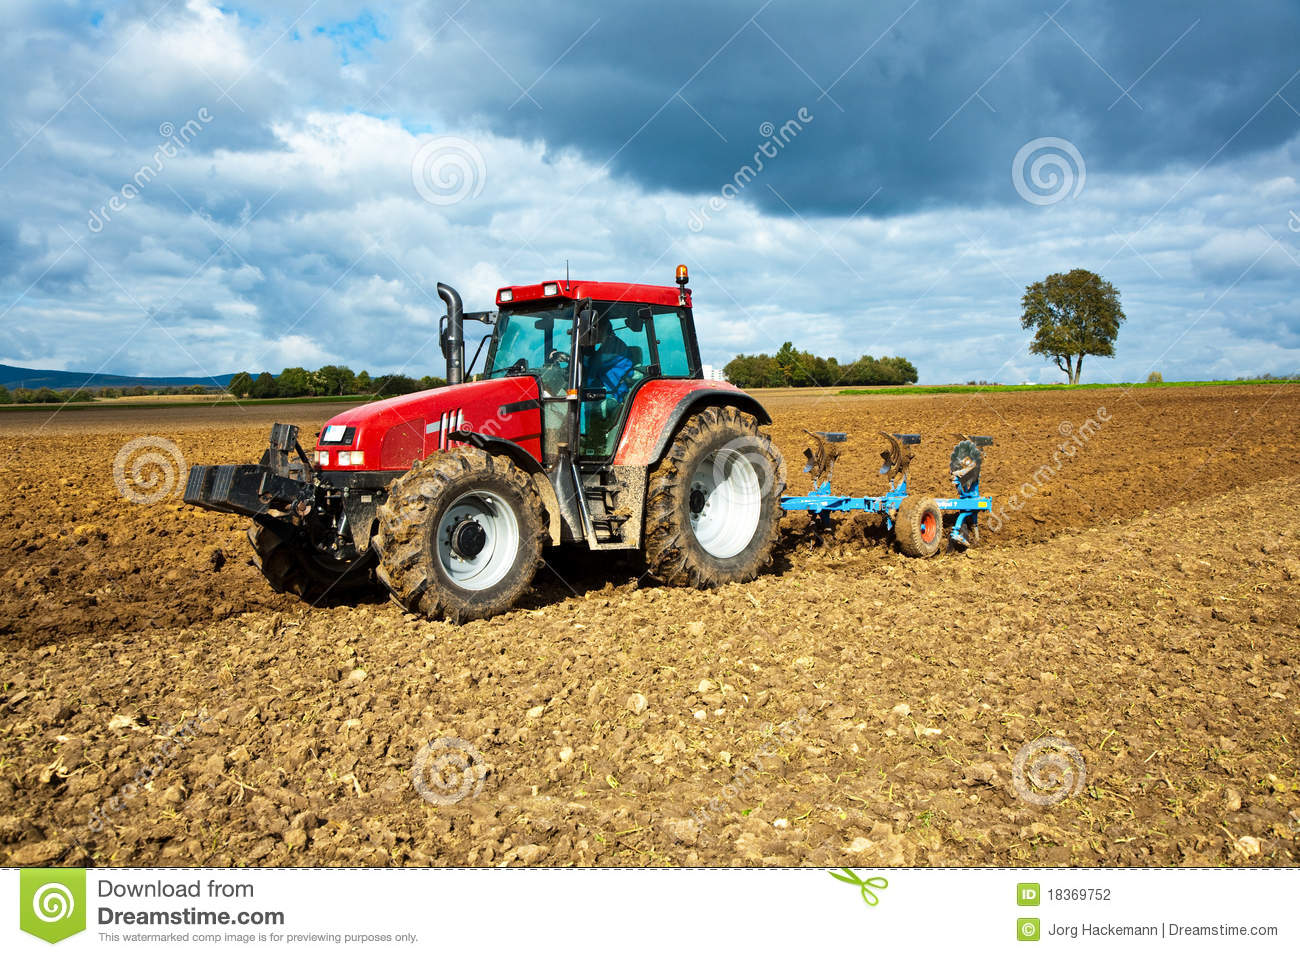 Tractor With Plow On Field Stock Photography   Image  18369752